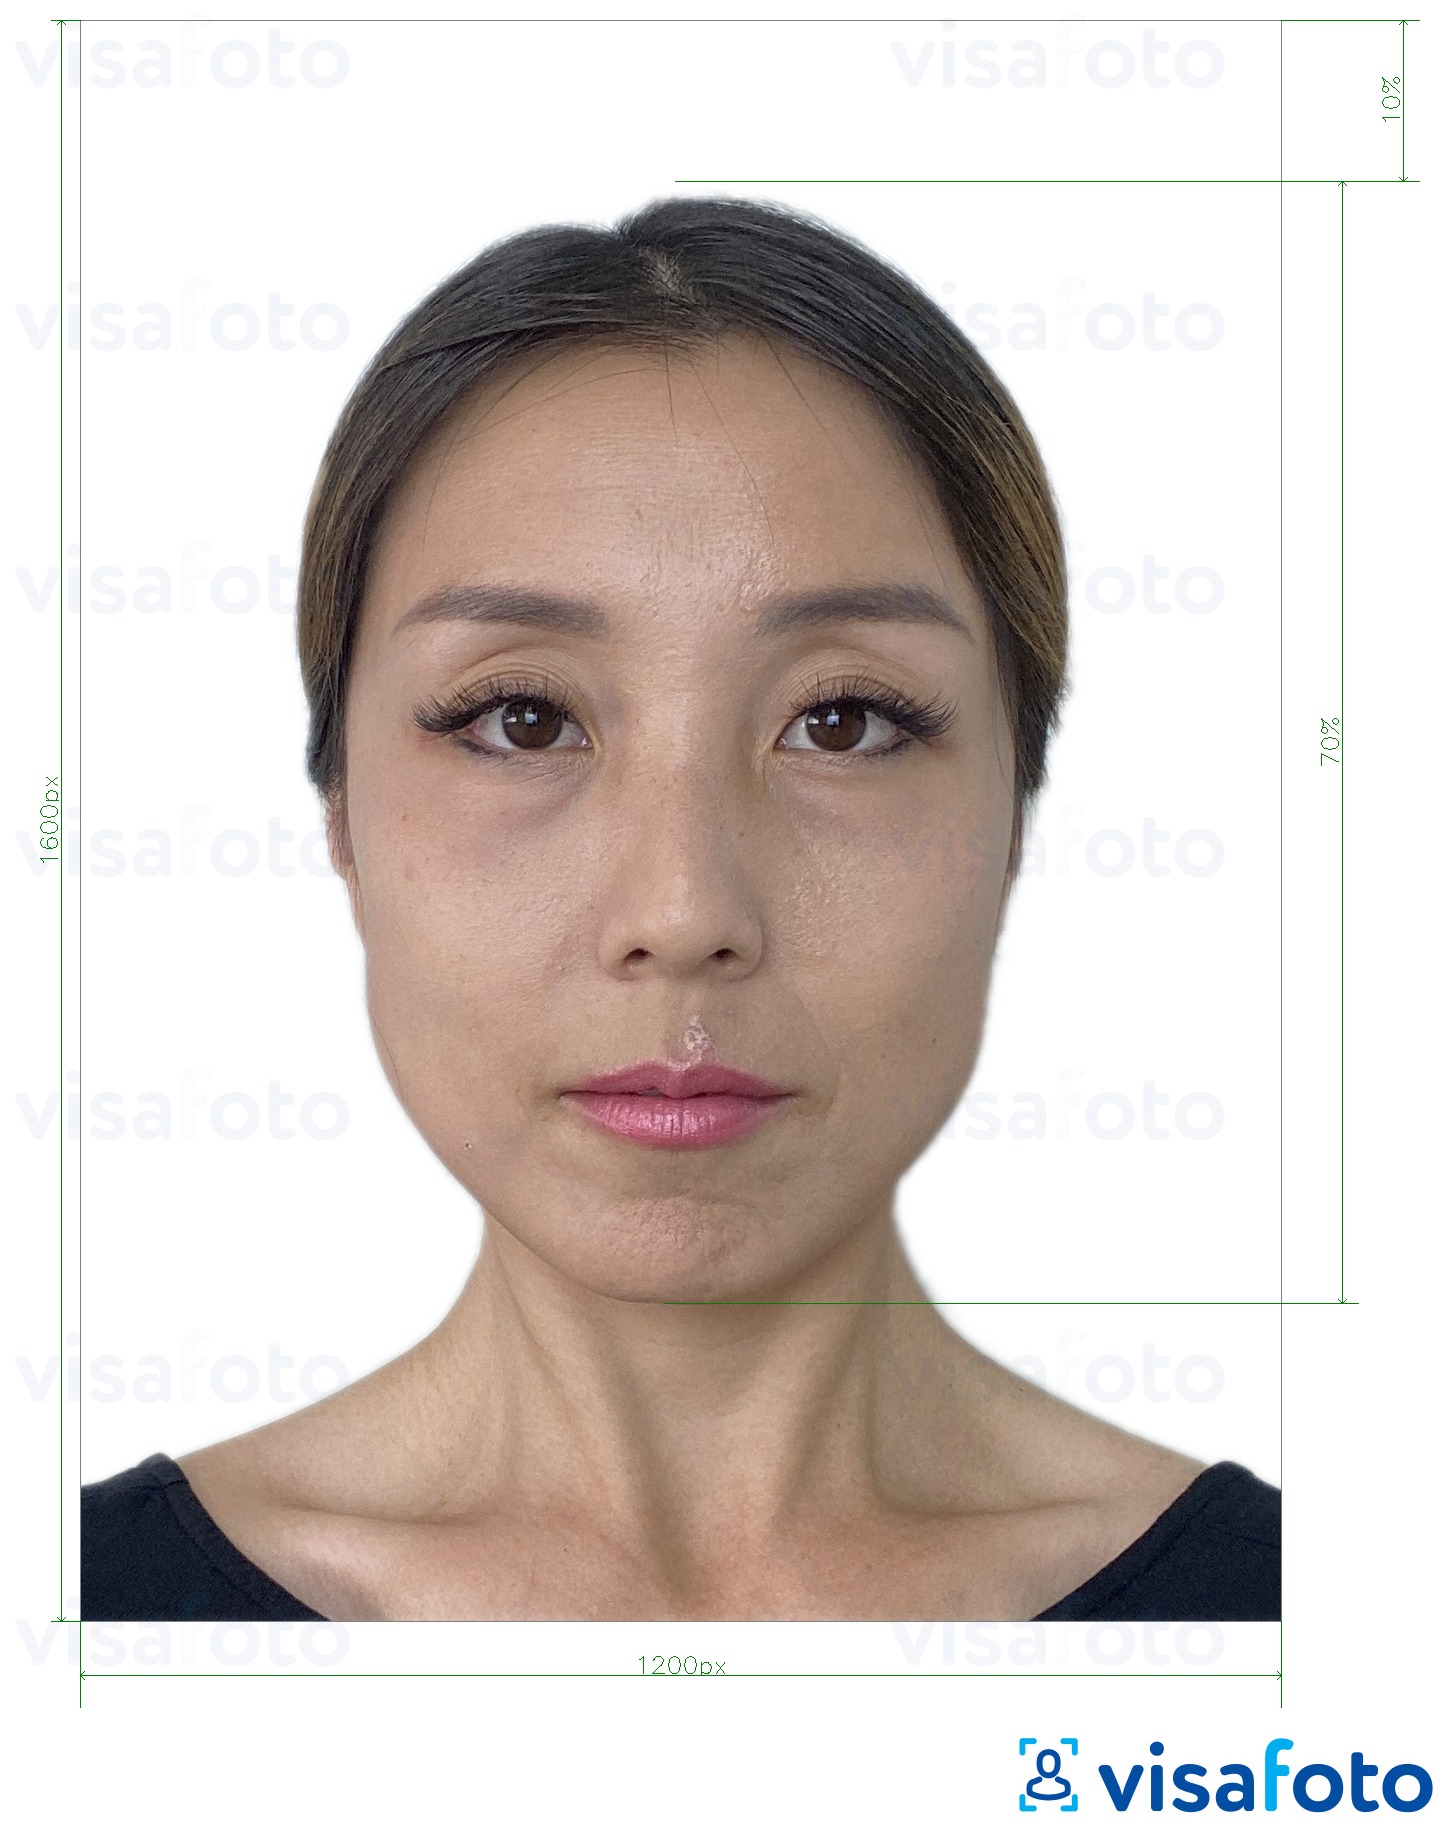 Result example: a correct visa or passport photo that you will receive